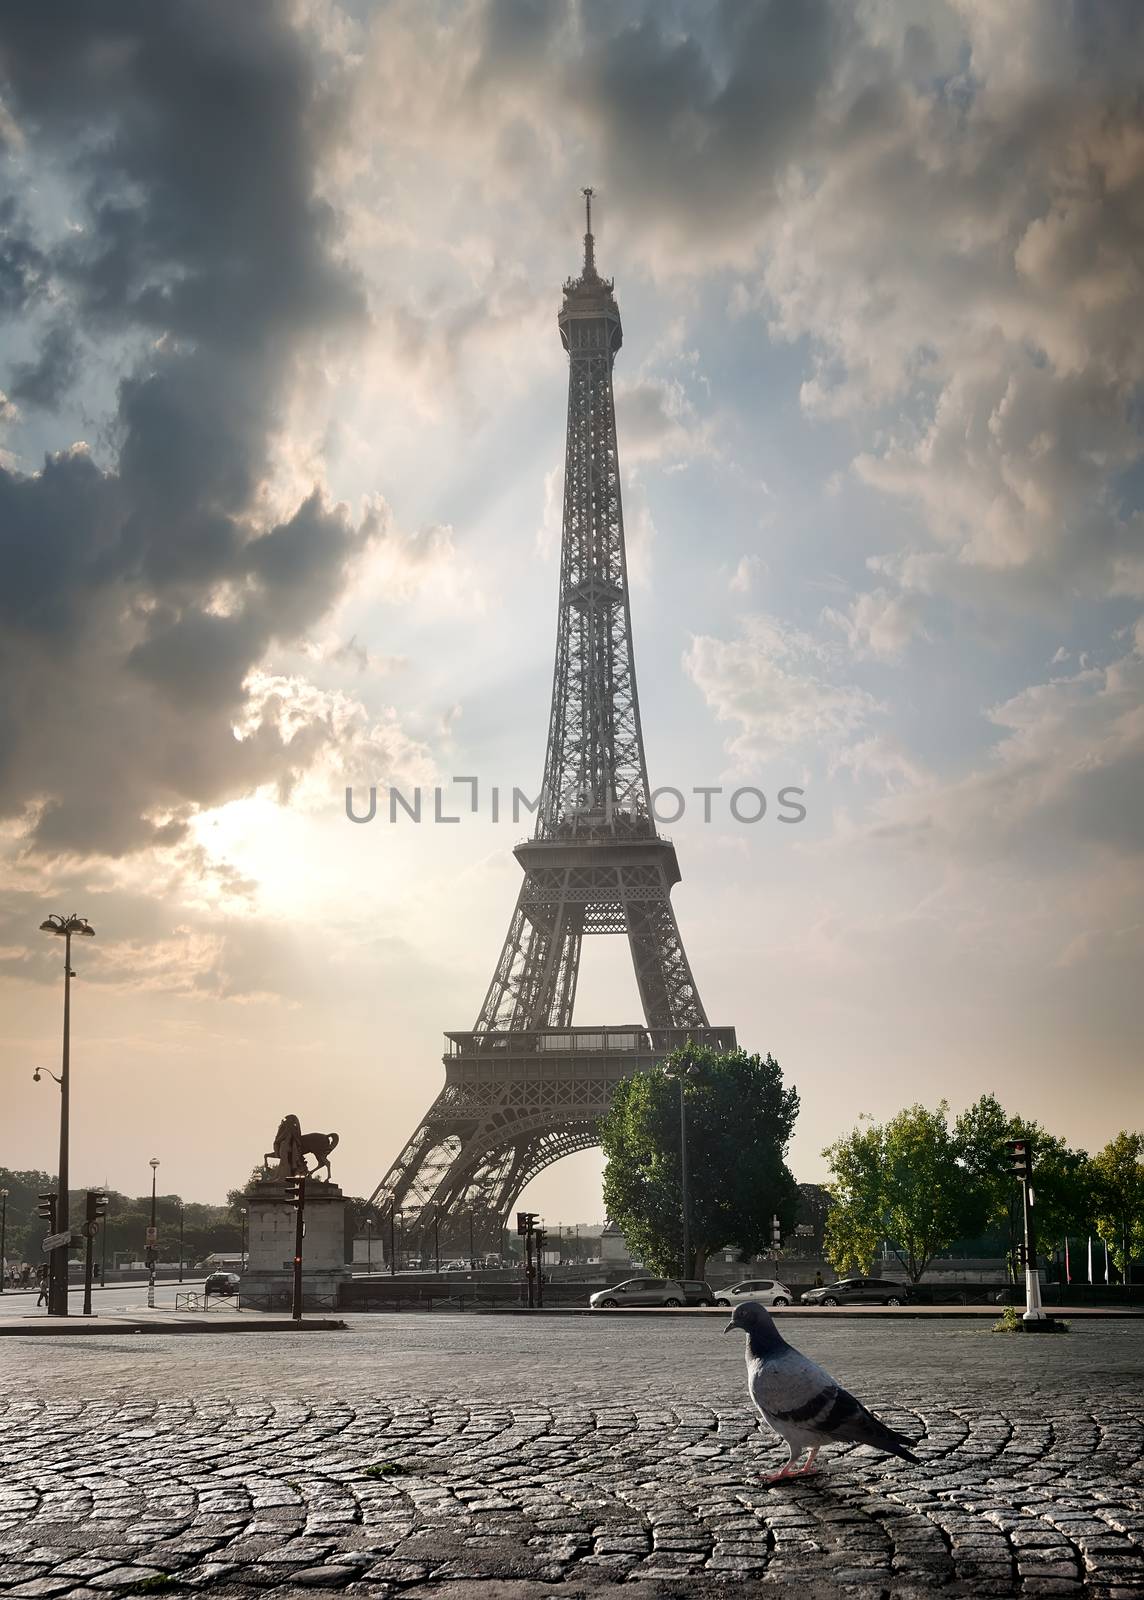 Cloudy sky over Eiffel Tower in Paris, France